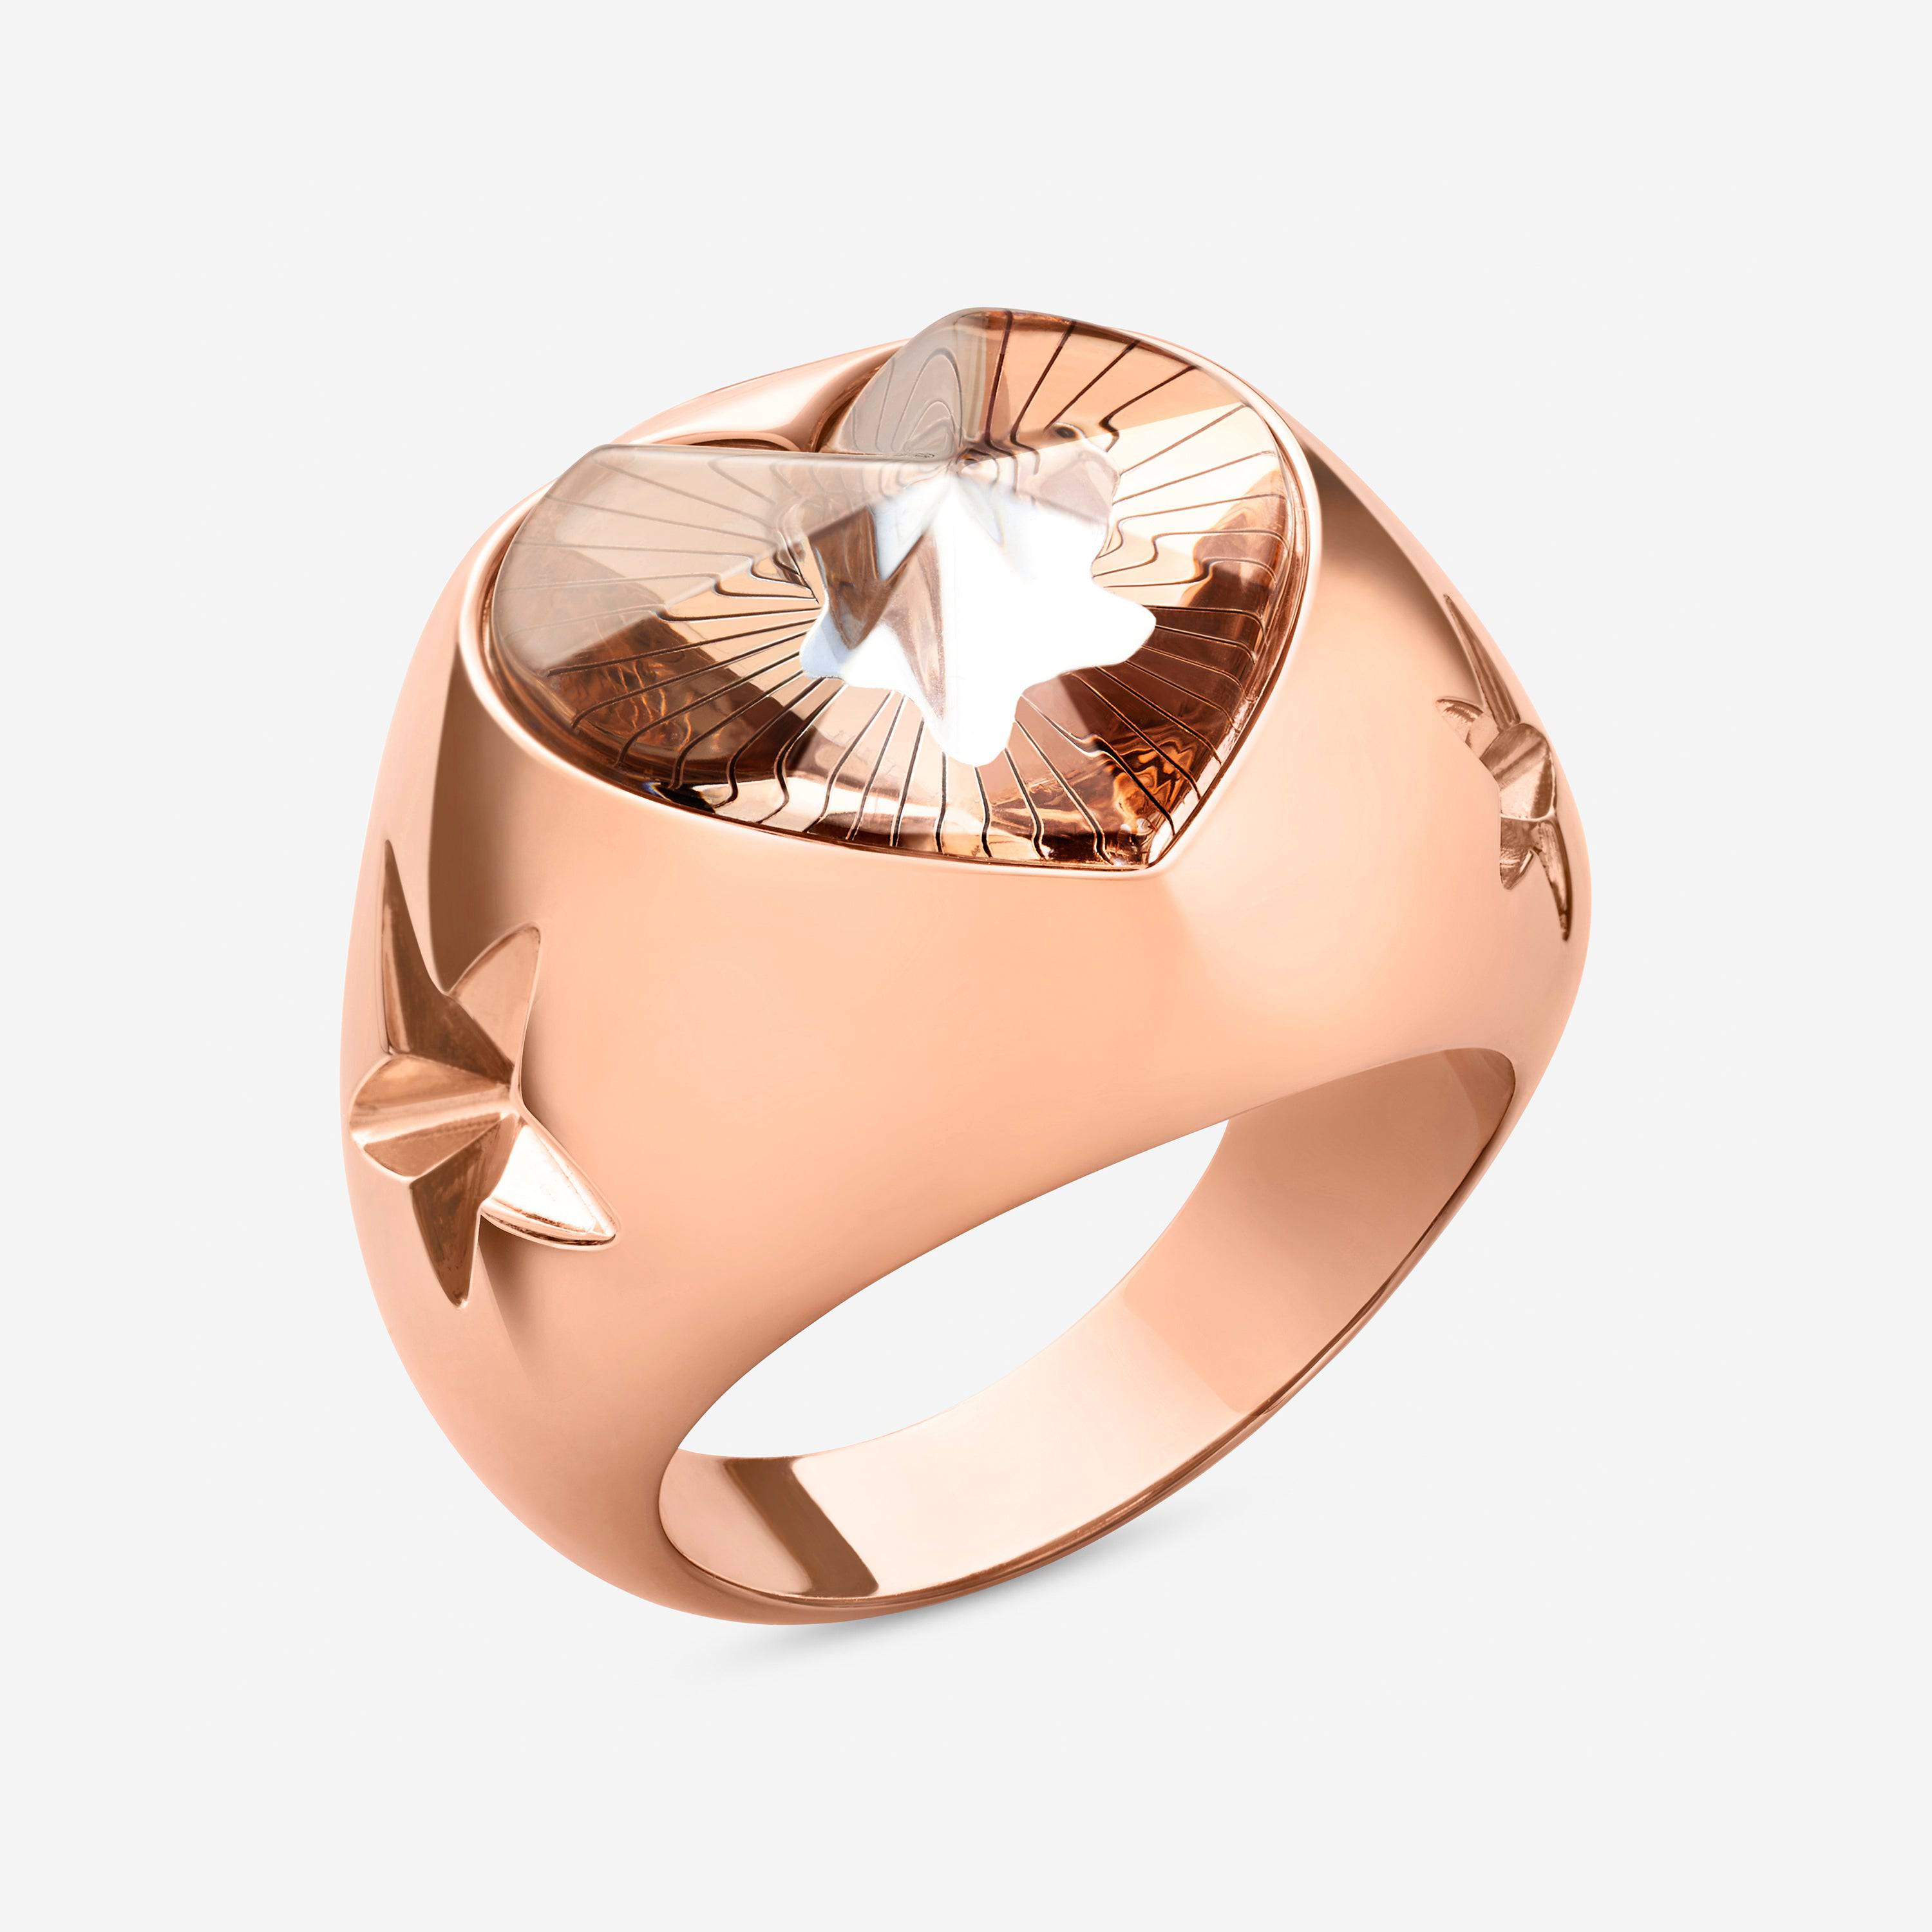 Baccarat 18K Gold Plated on Sterling Silver, Crystal Heart And Star Statement Ring 2812870 - THE SOLIST